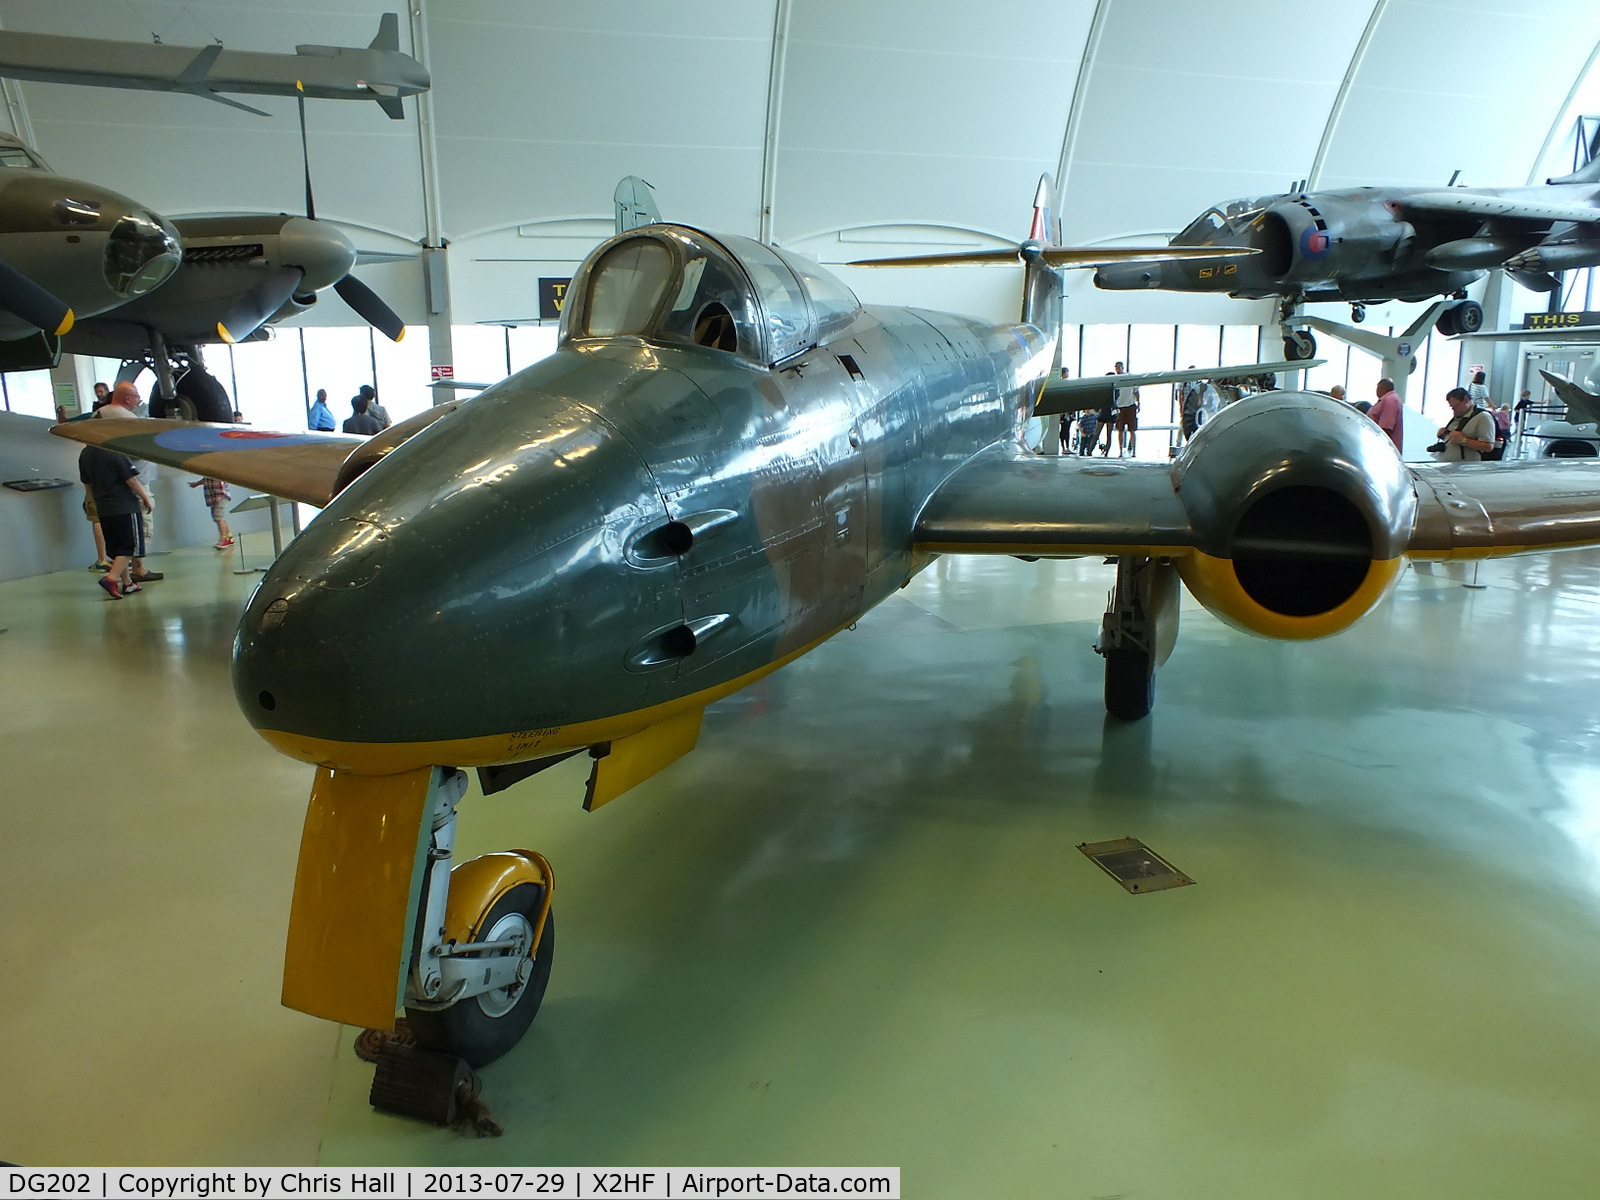 DG202, Gloster Meteor F.9/40 C/N Not found DG202, Displayed at the RAF Museum, Hendon